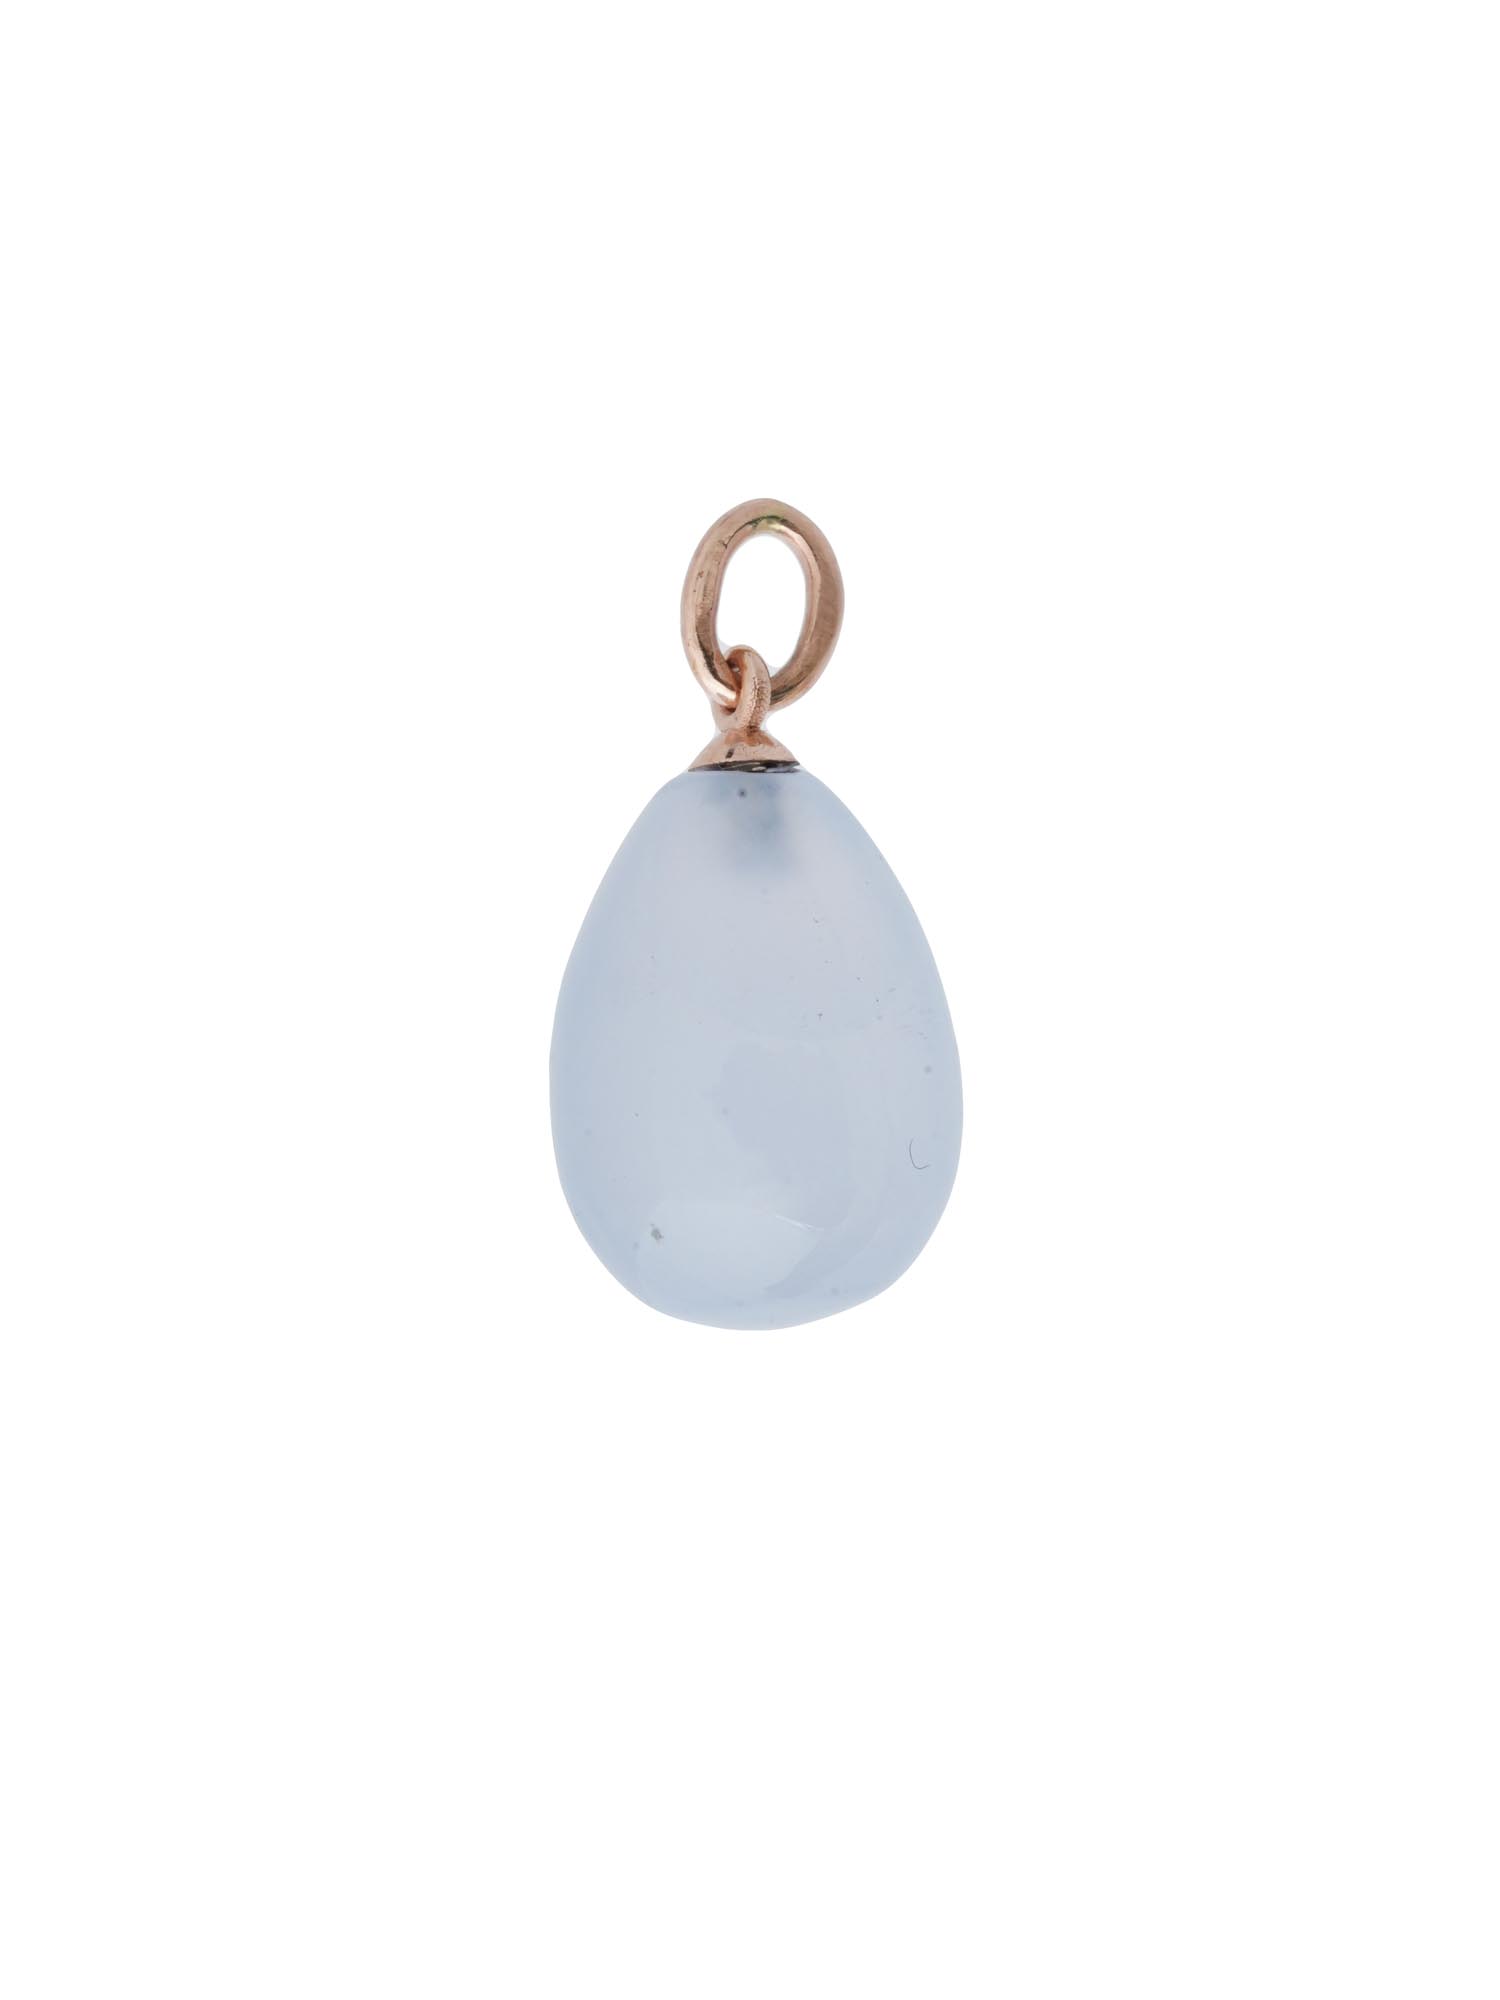 RUSSIAN 14K GOLD AND BLUE CHALCEDONY EGG PENDANT PIC-1